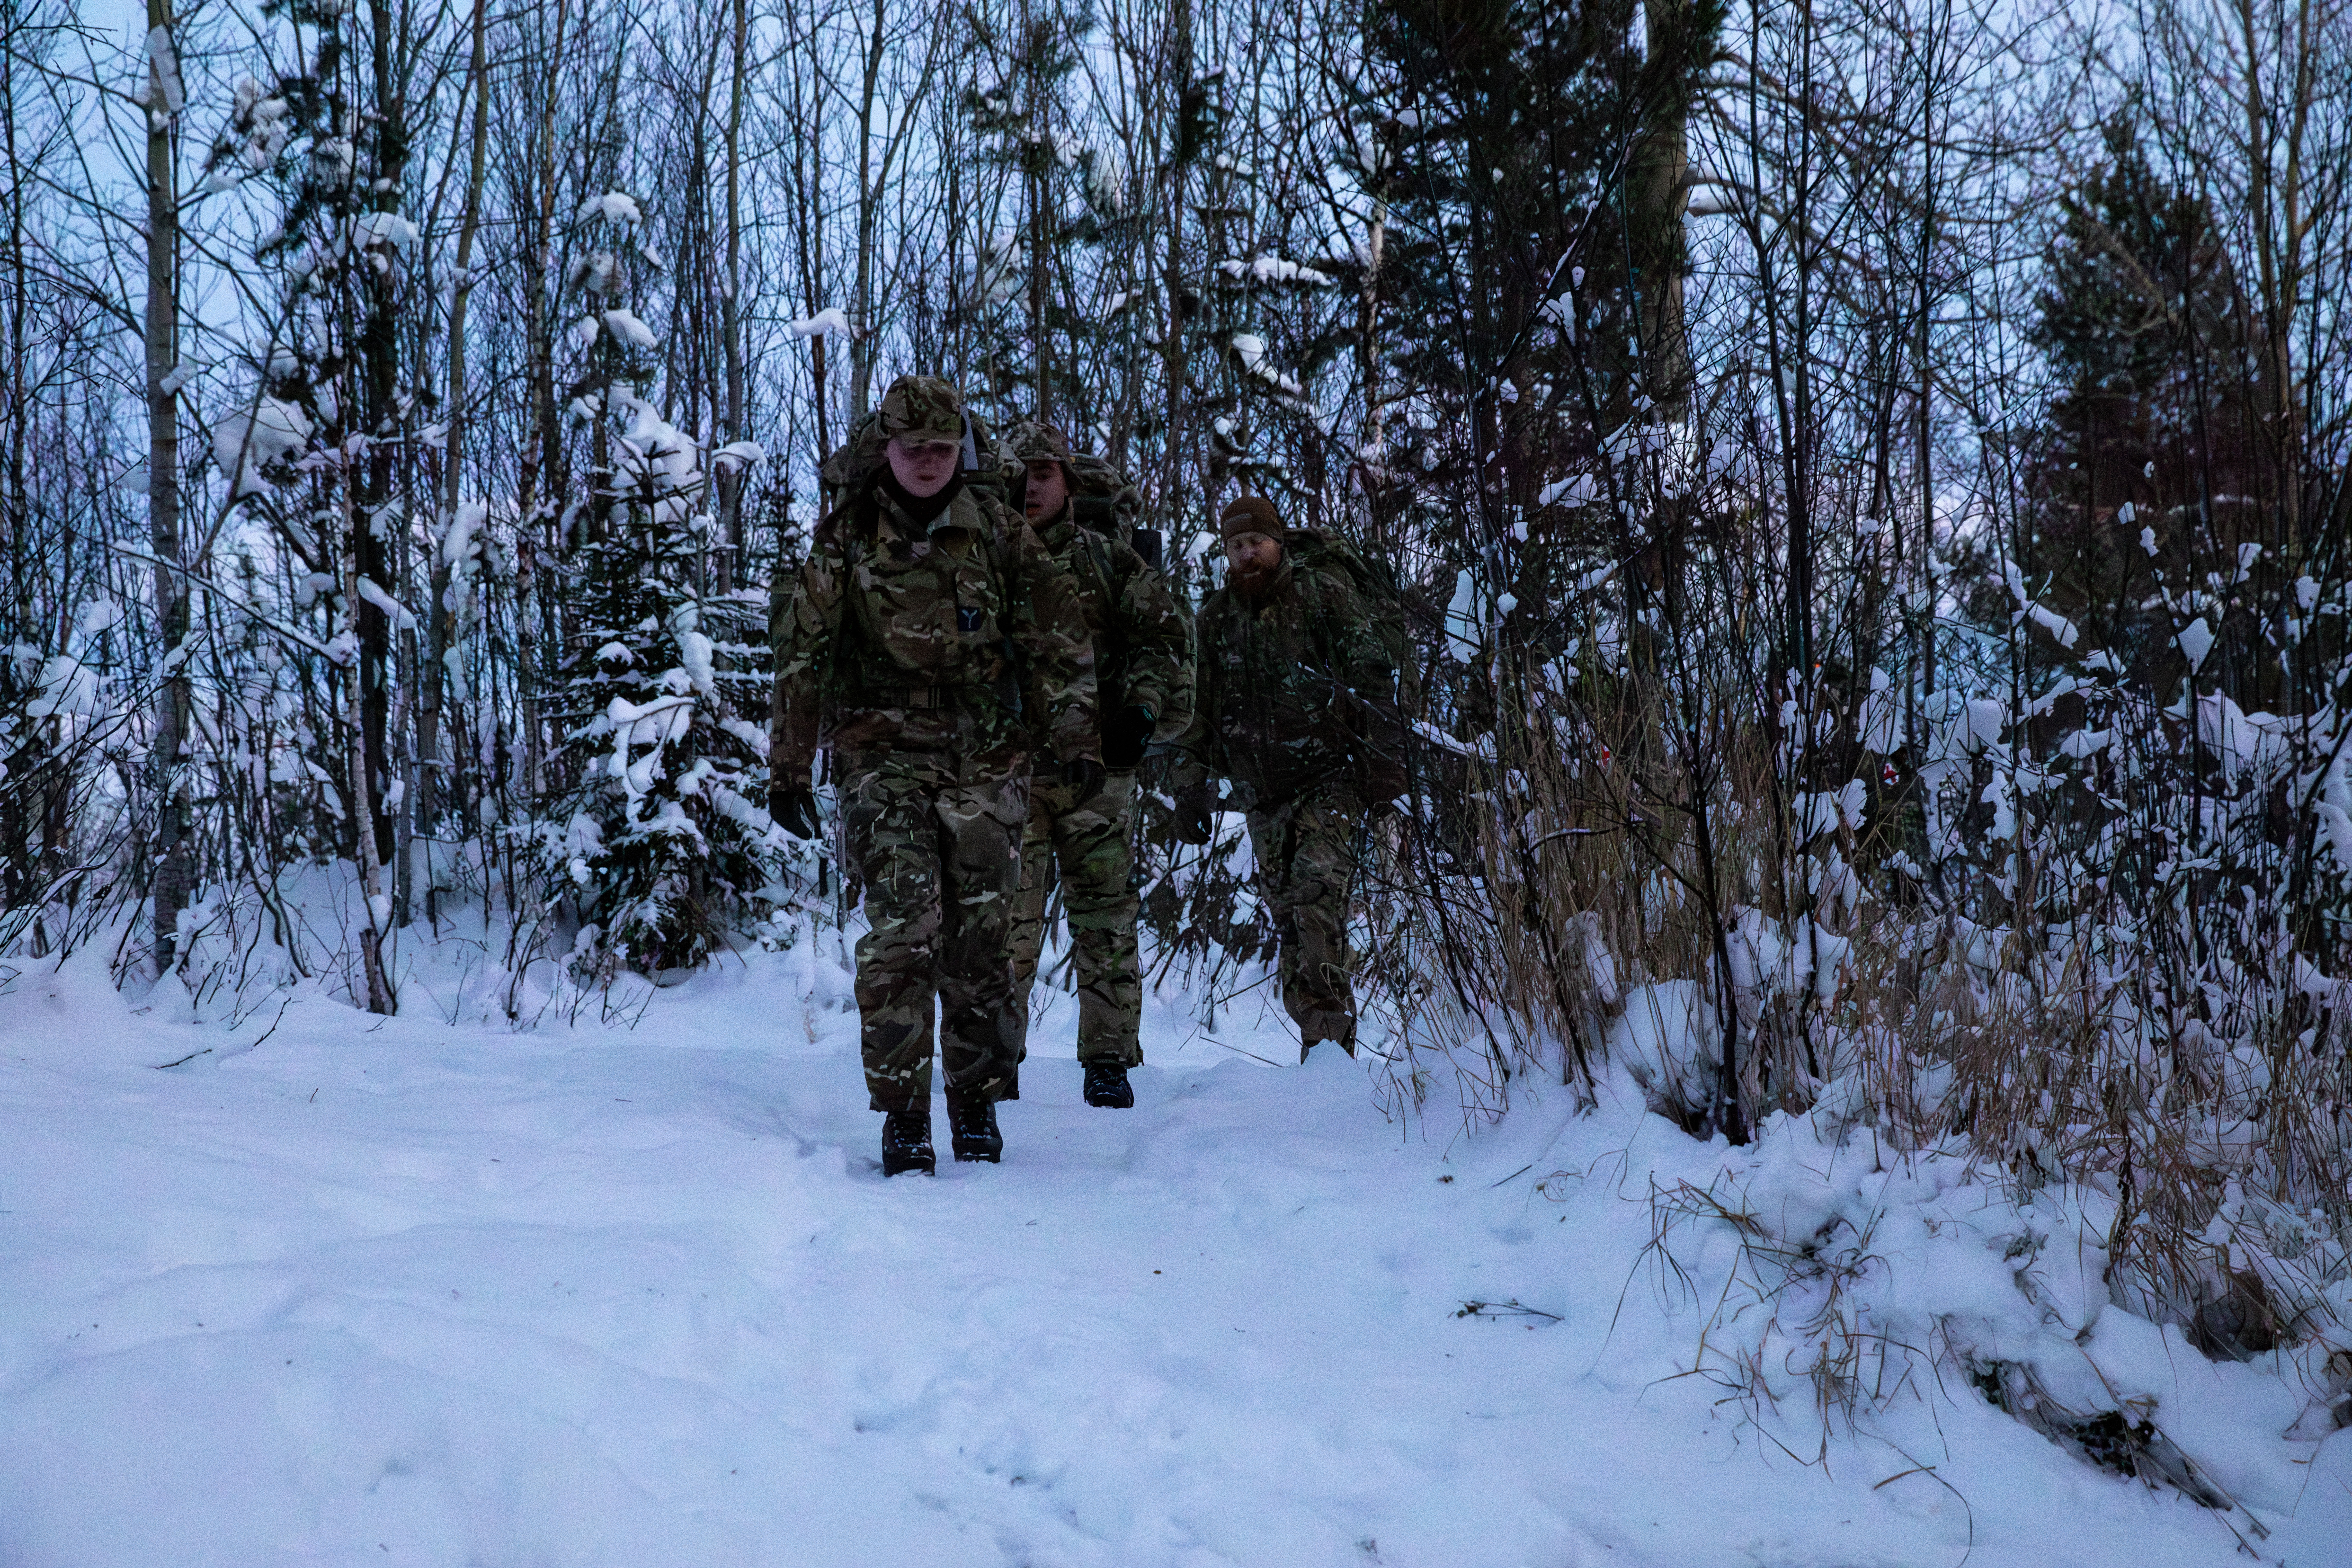 RAF personnel walking through snow and trees